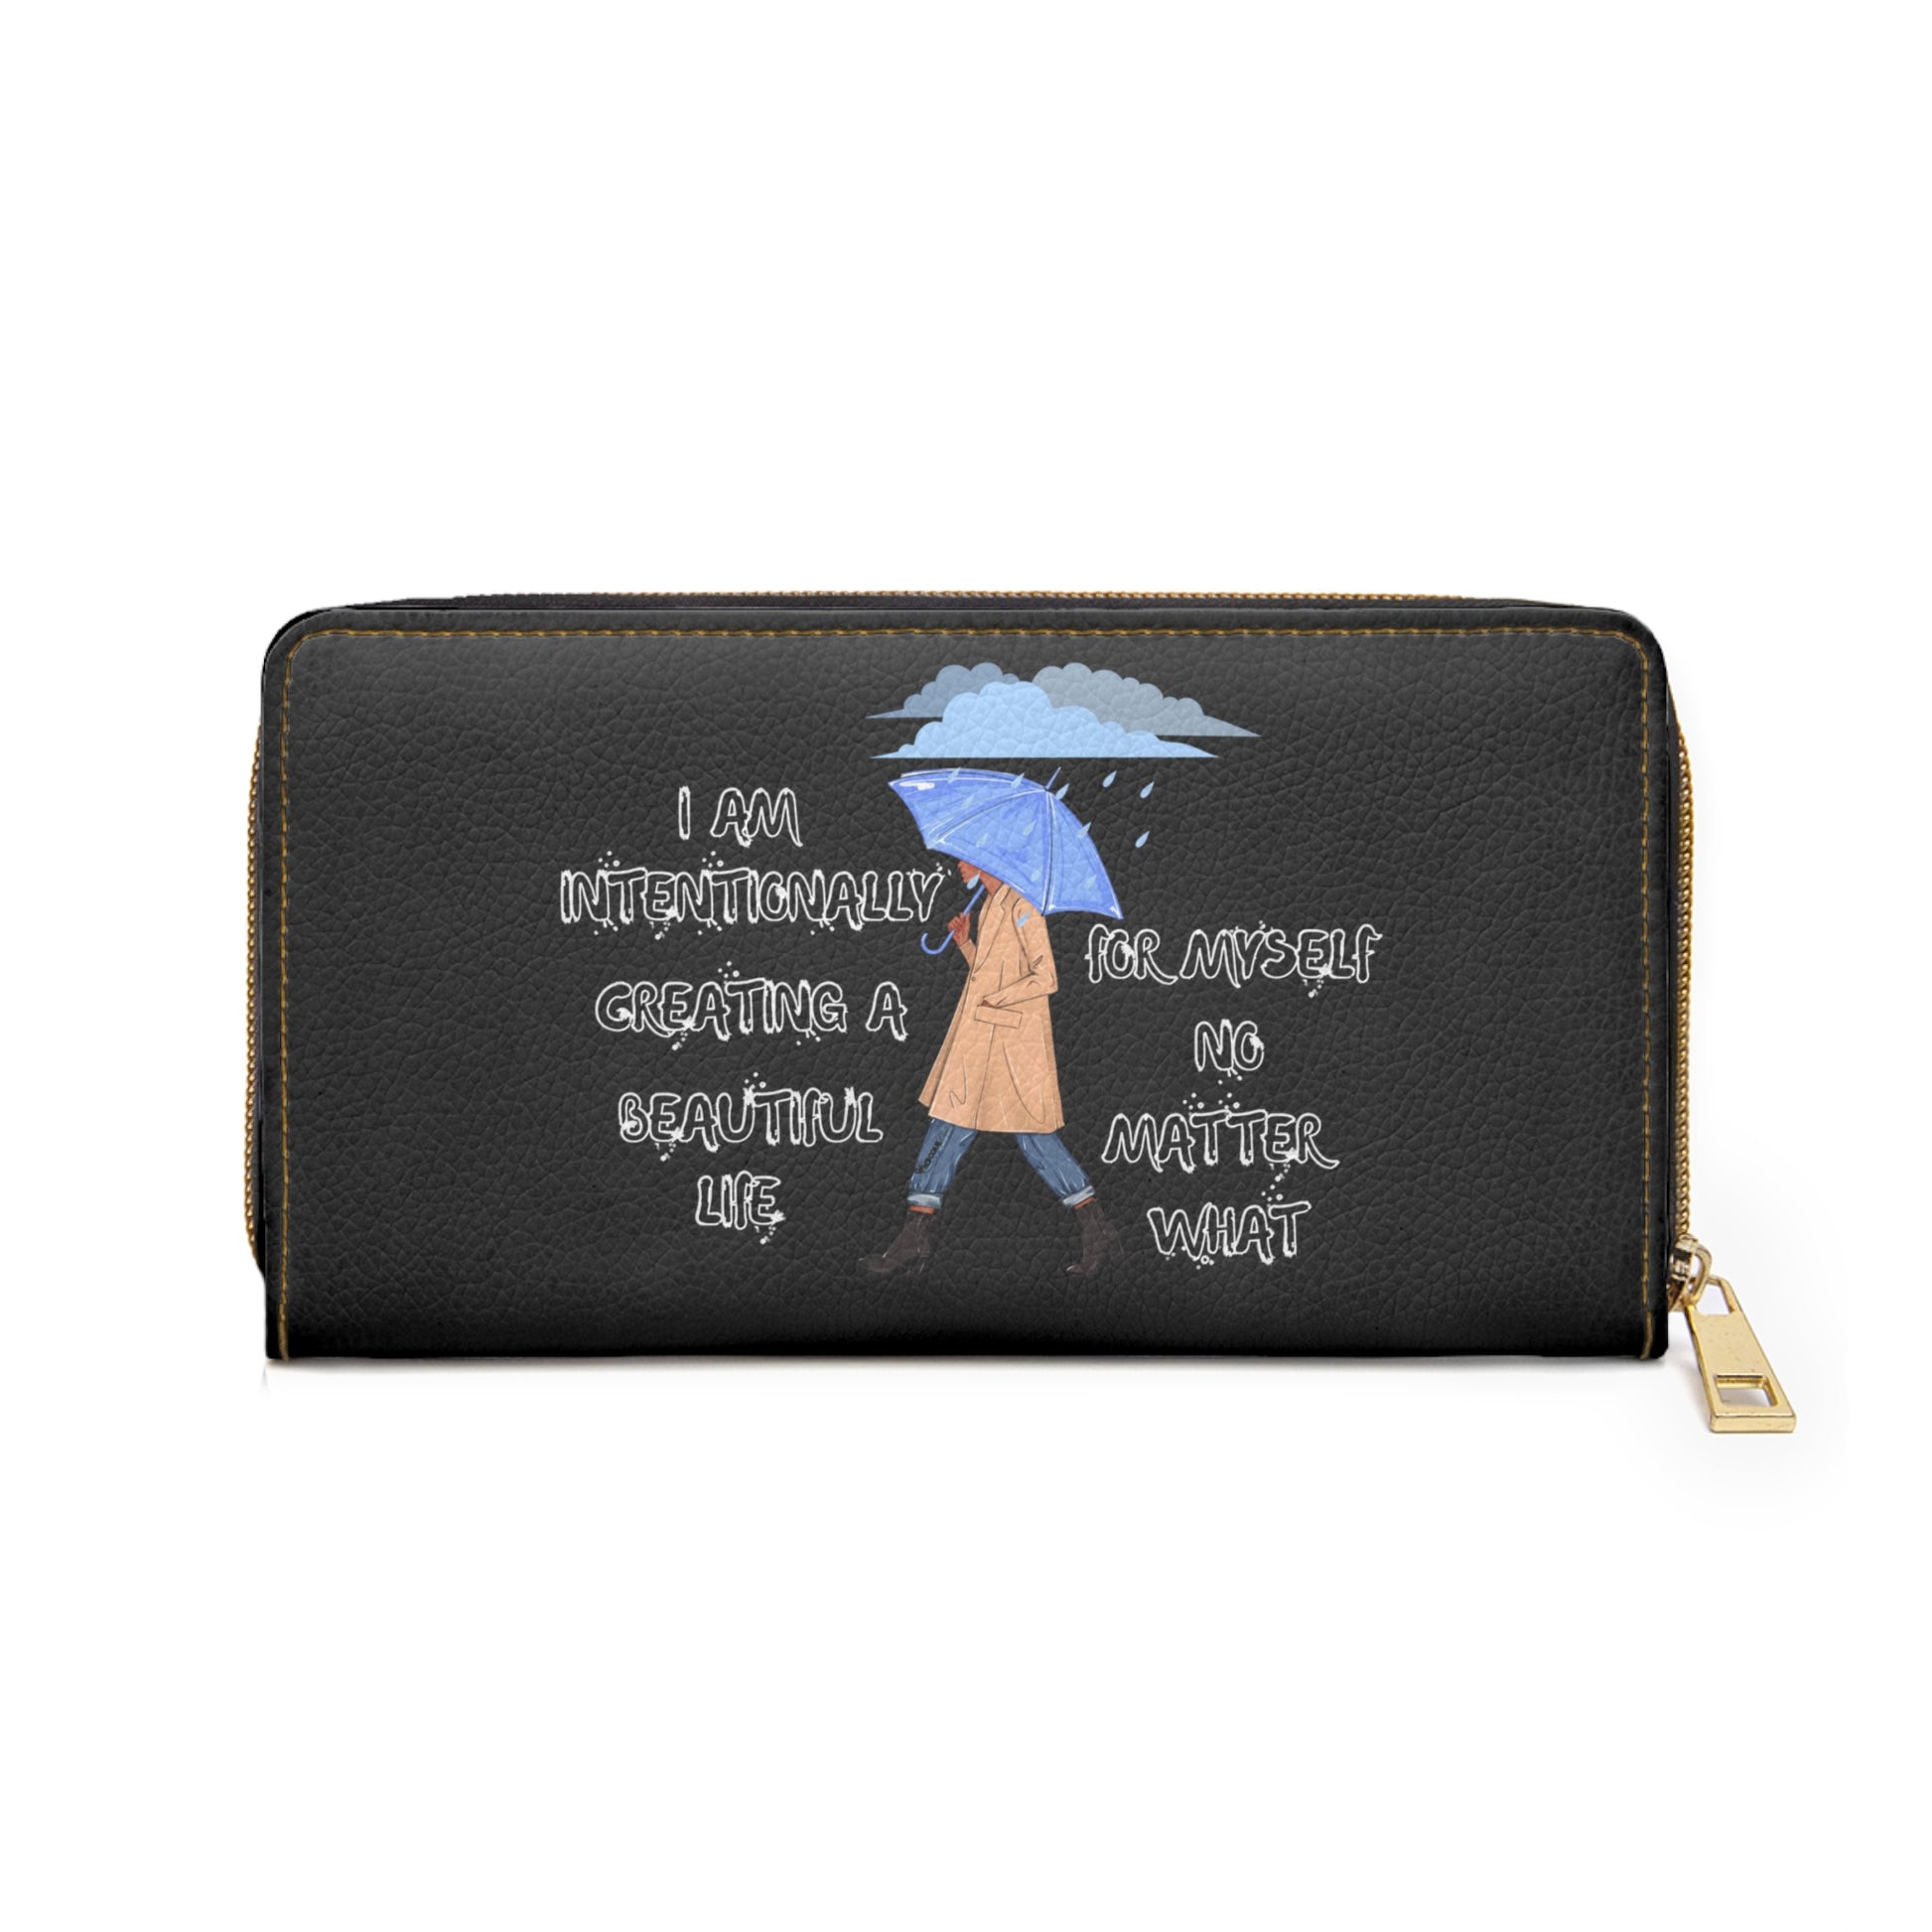 "I AM Intentionally Creating A Beautiful Life"- Positive Afrocentric Affirmation Vegan Leather Wallet Bag- Empower Your Style and Self-Love' ; Black Wallet